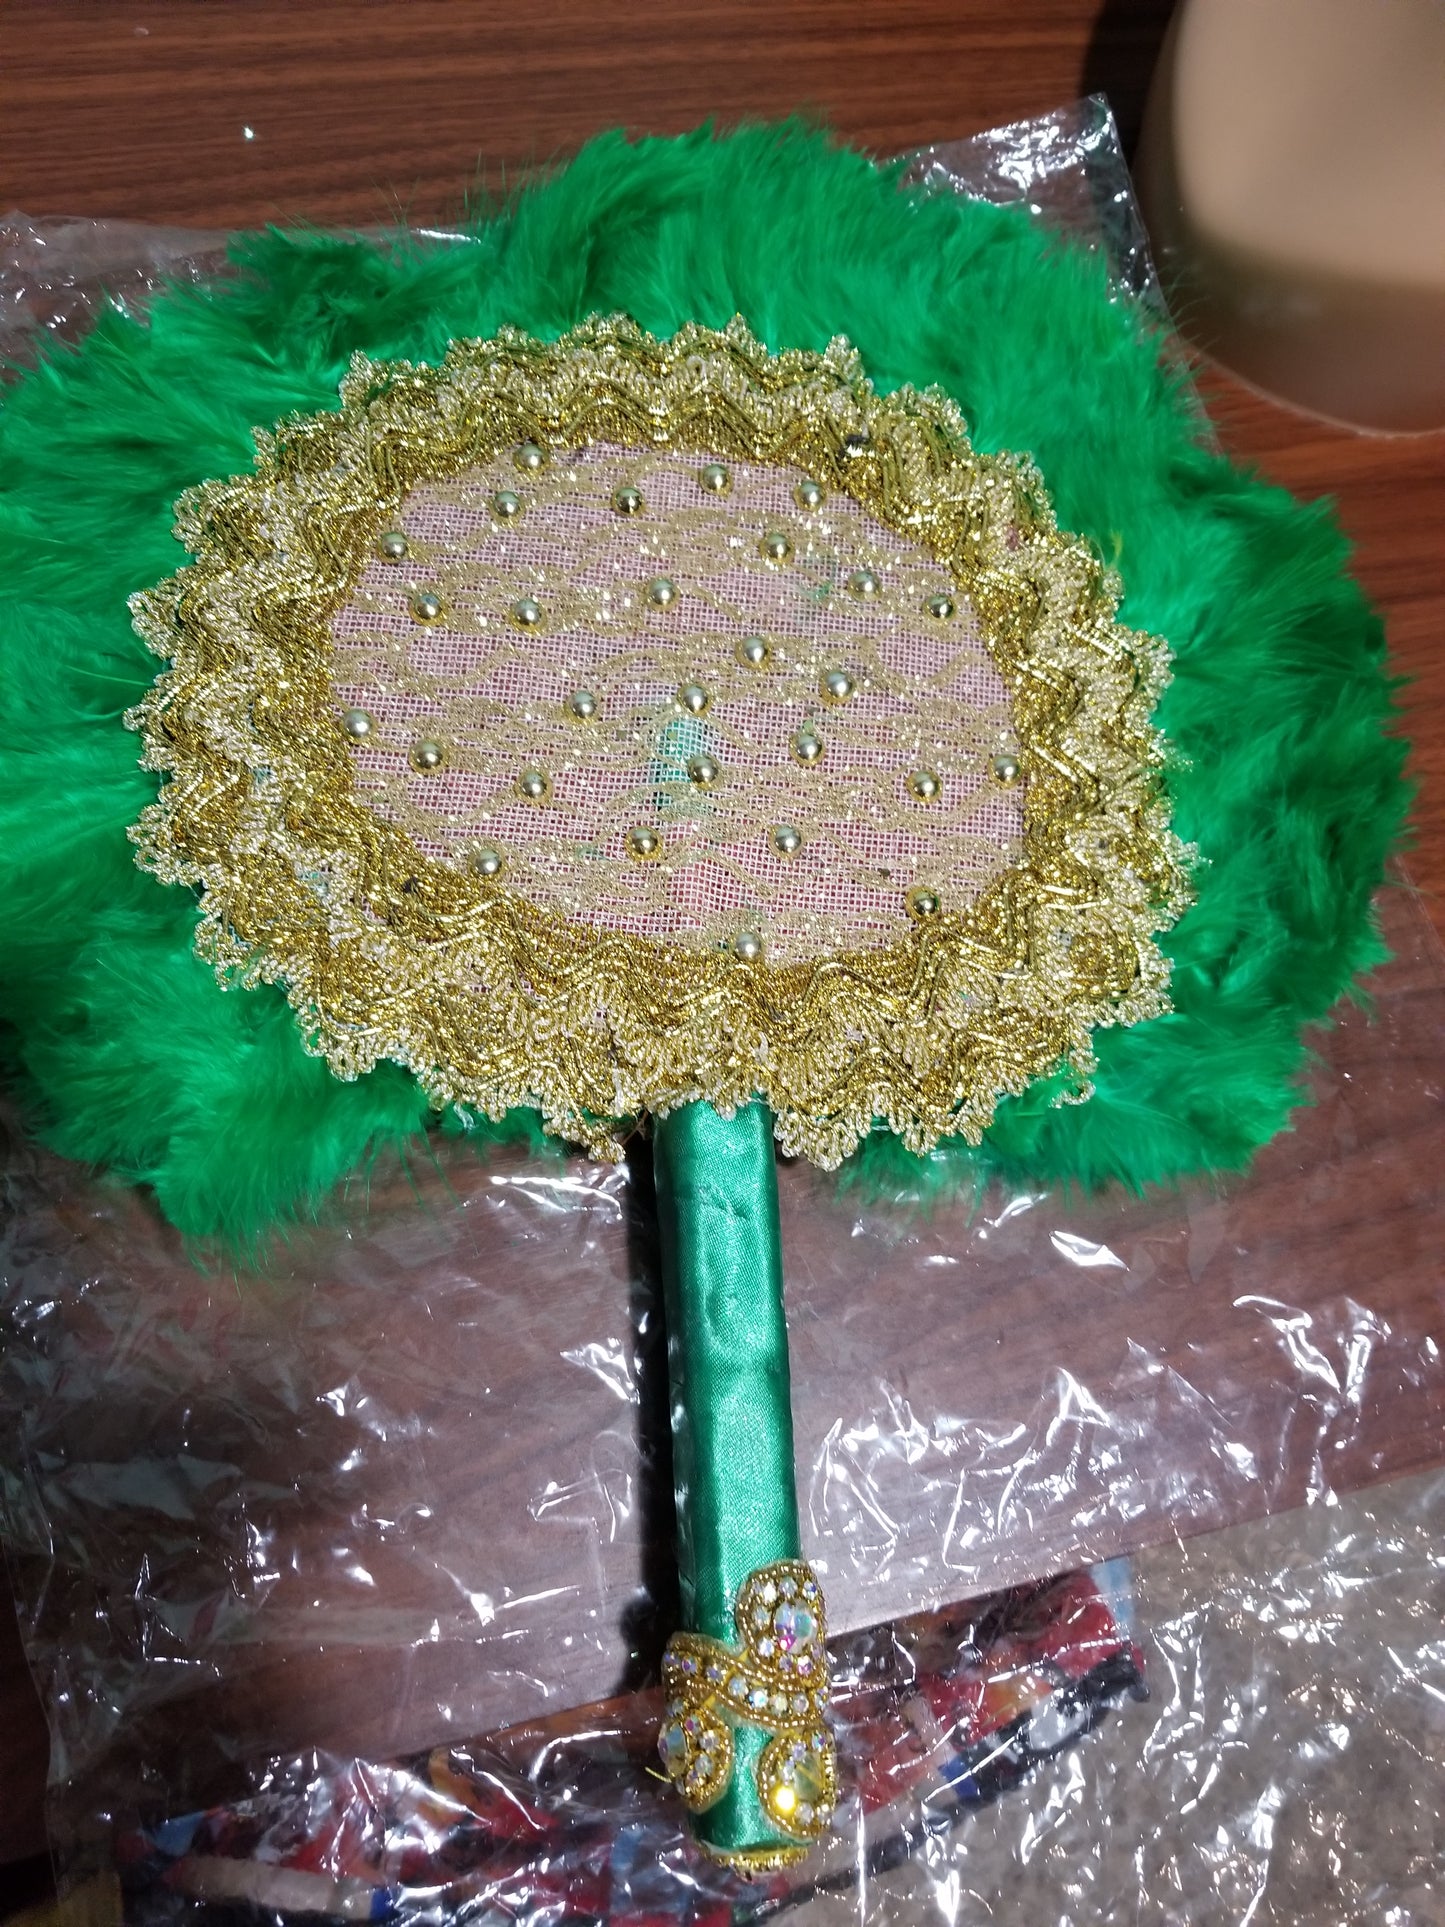 New arrival Green bead-dazzled feather hand fan. Nigerian Bridal accessories Feather hand fan. Long handle beaded and stoned. Size: Small feather in Green color